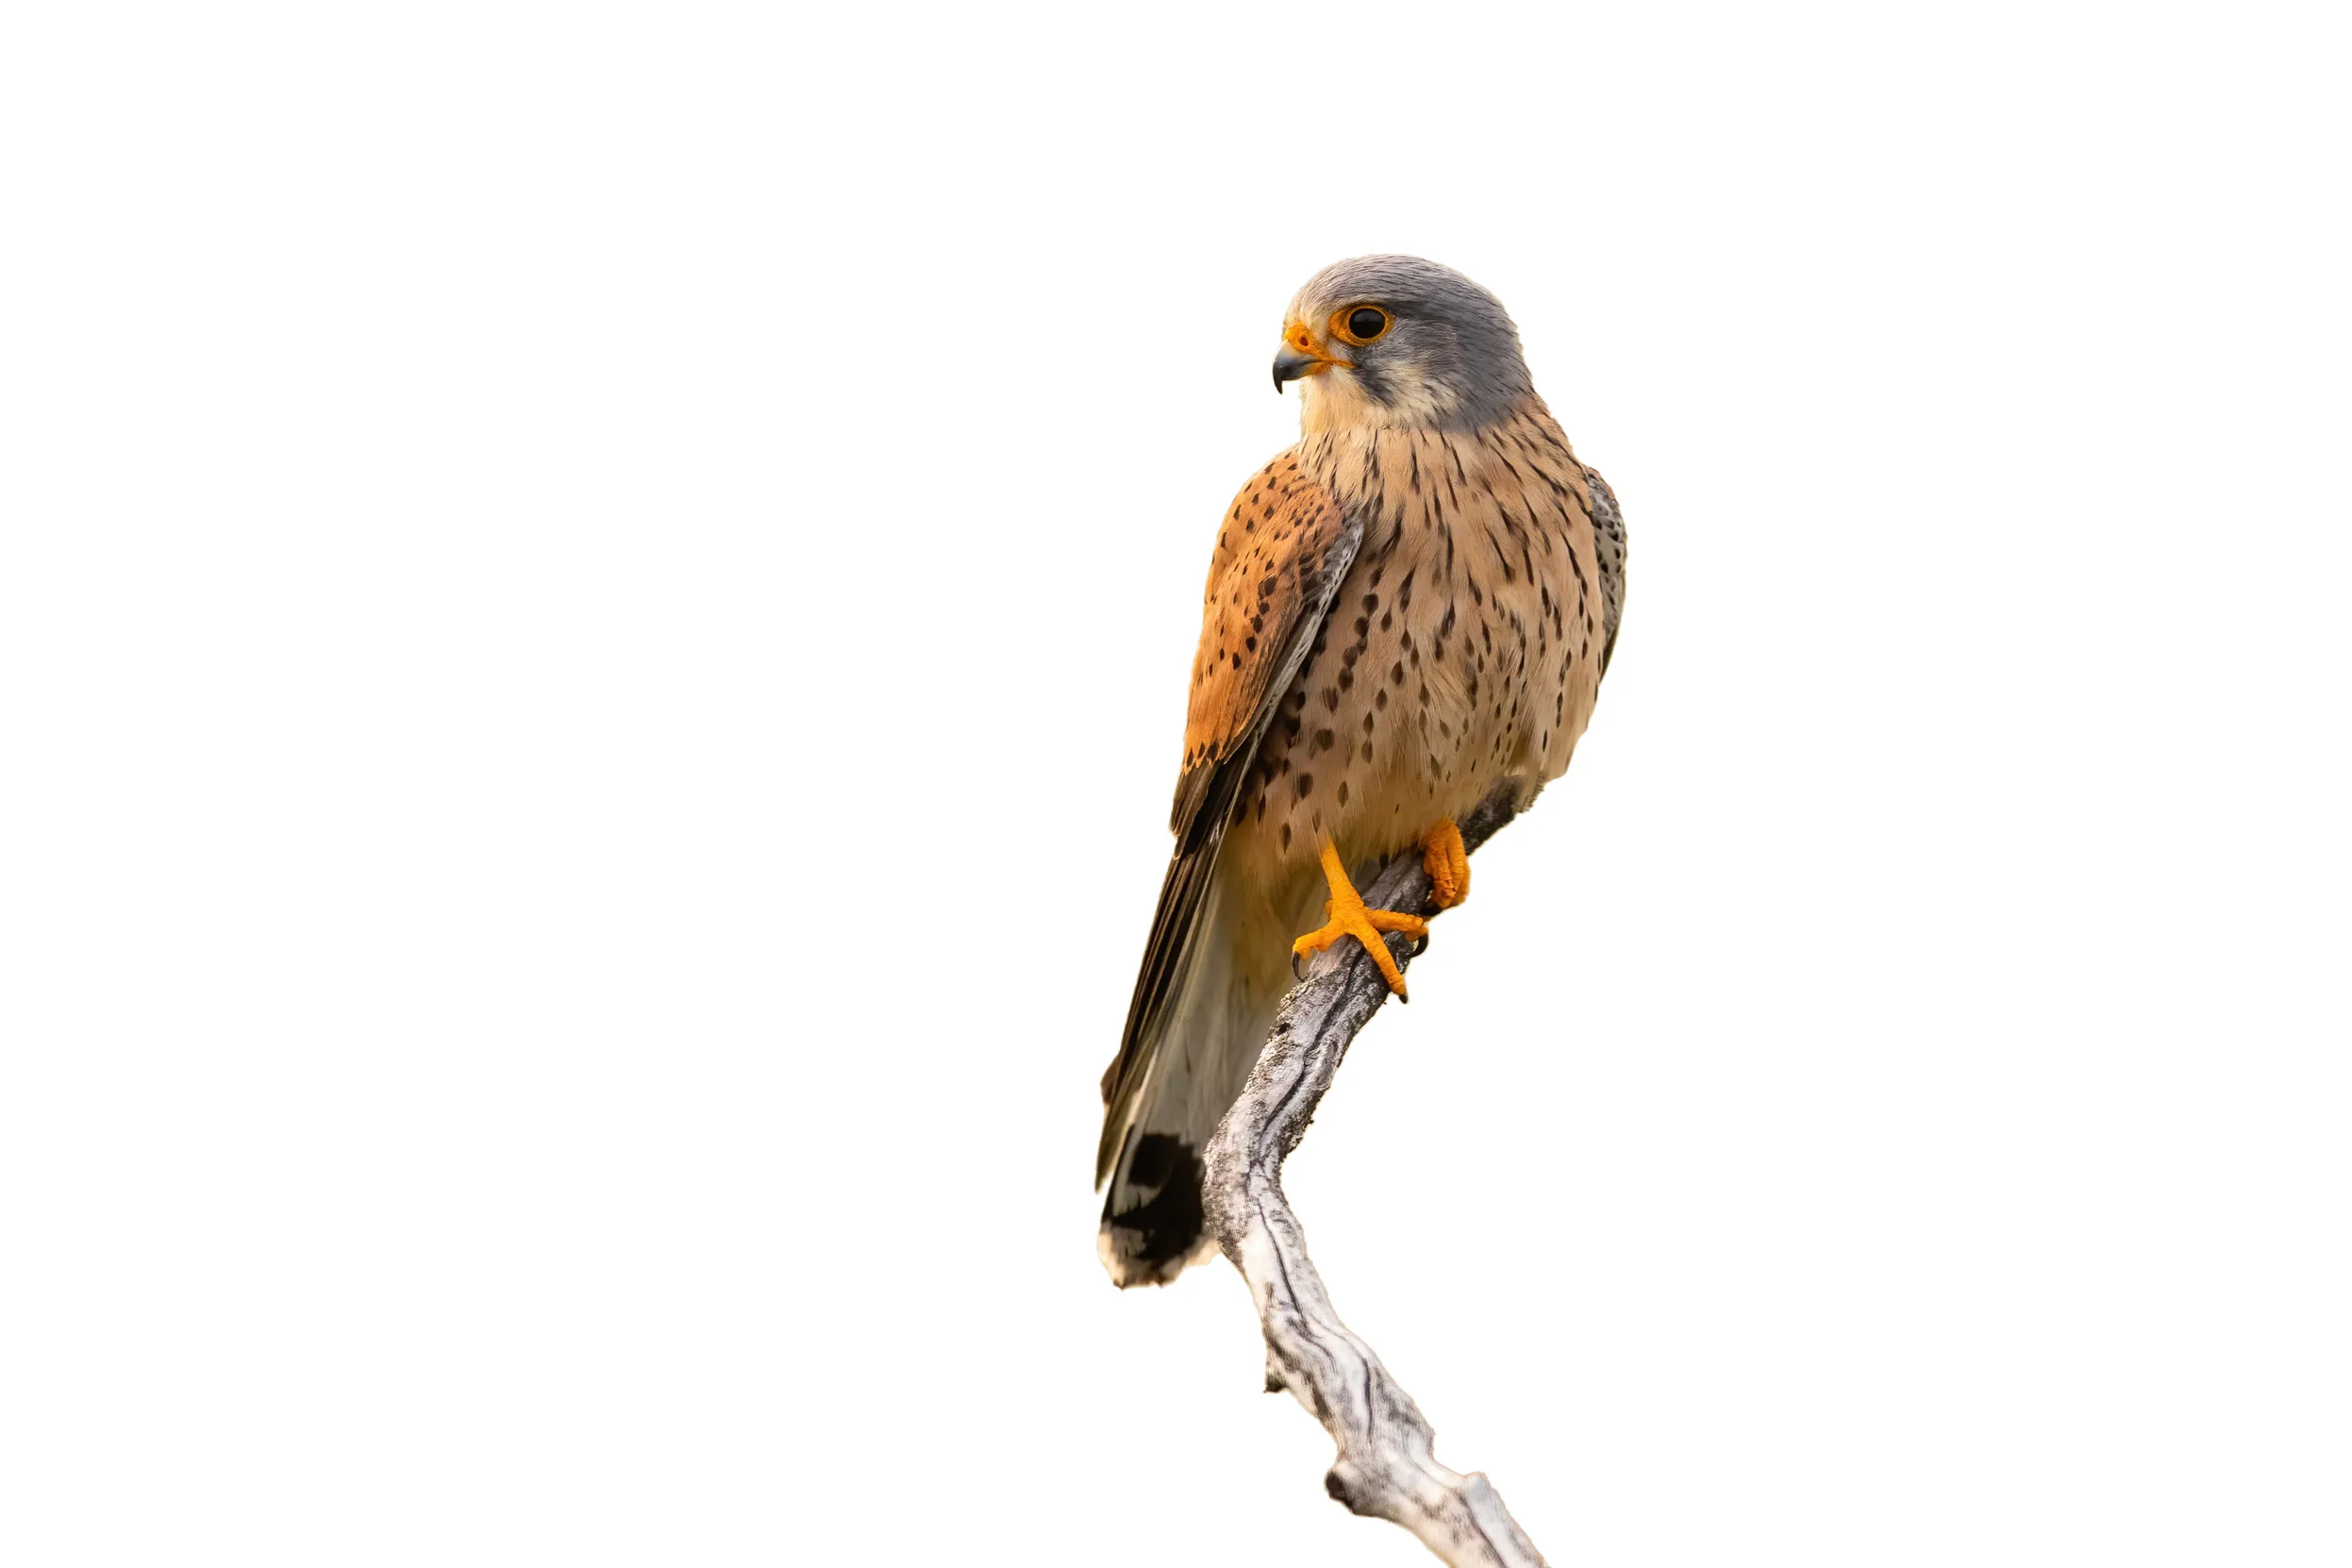 Common Kestrel perched on a branch cut out on white background.